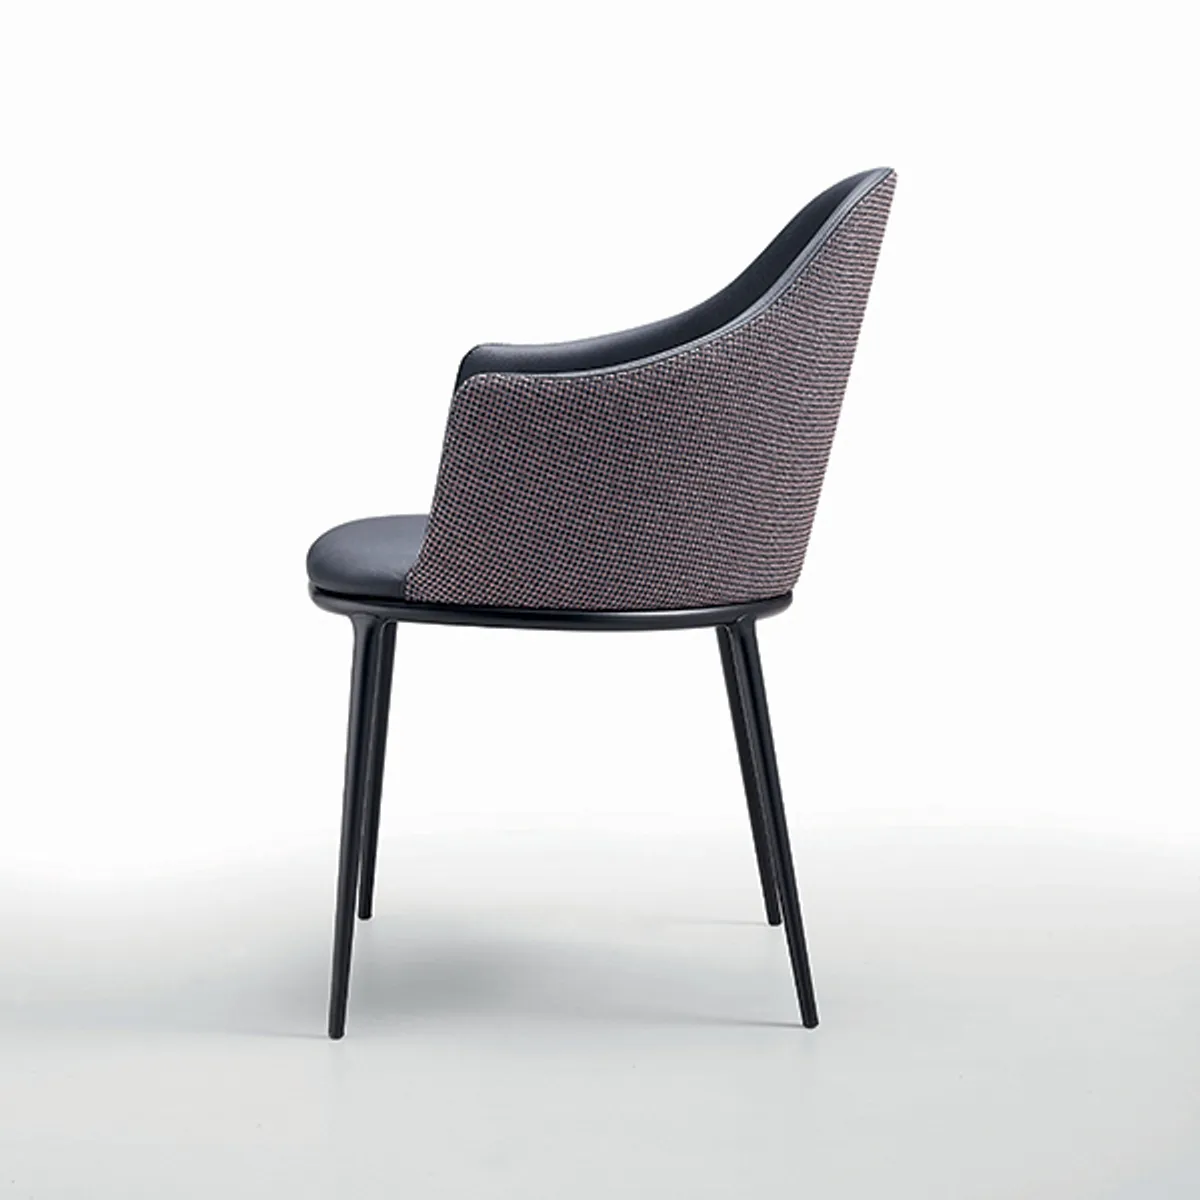 Lea Armchair Contrast Upholsterty Inside Out Contracts